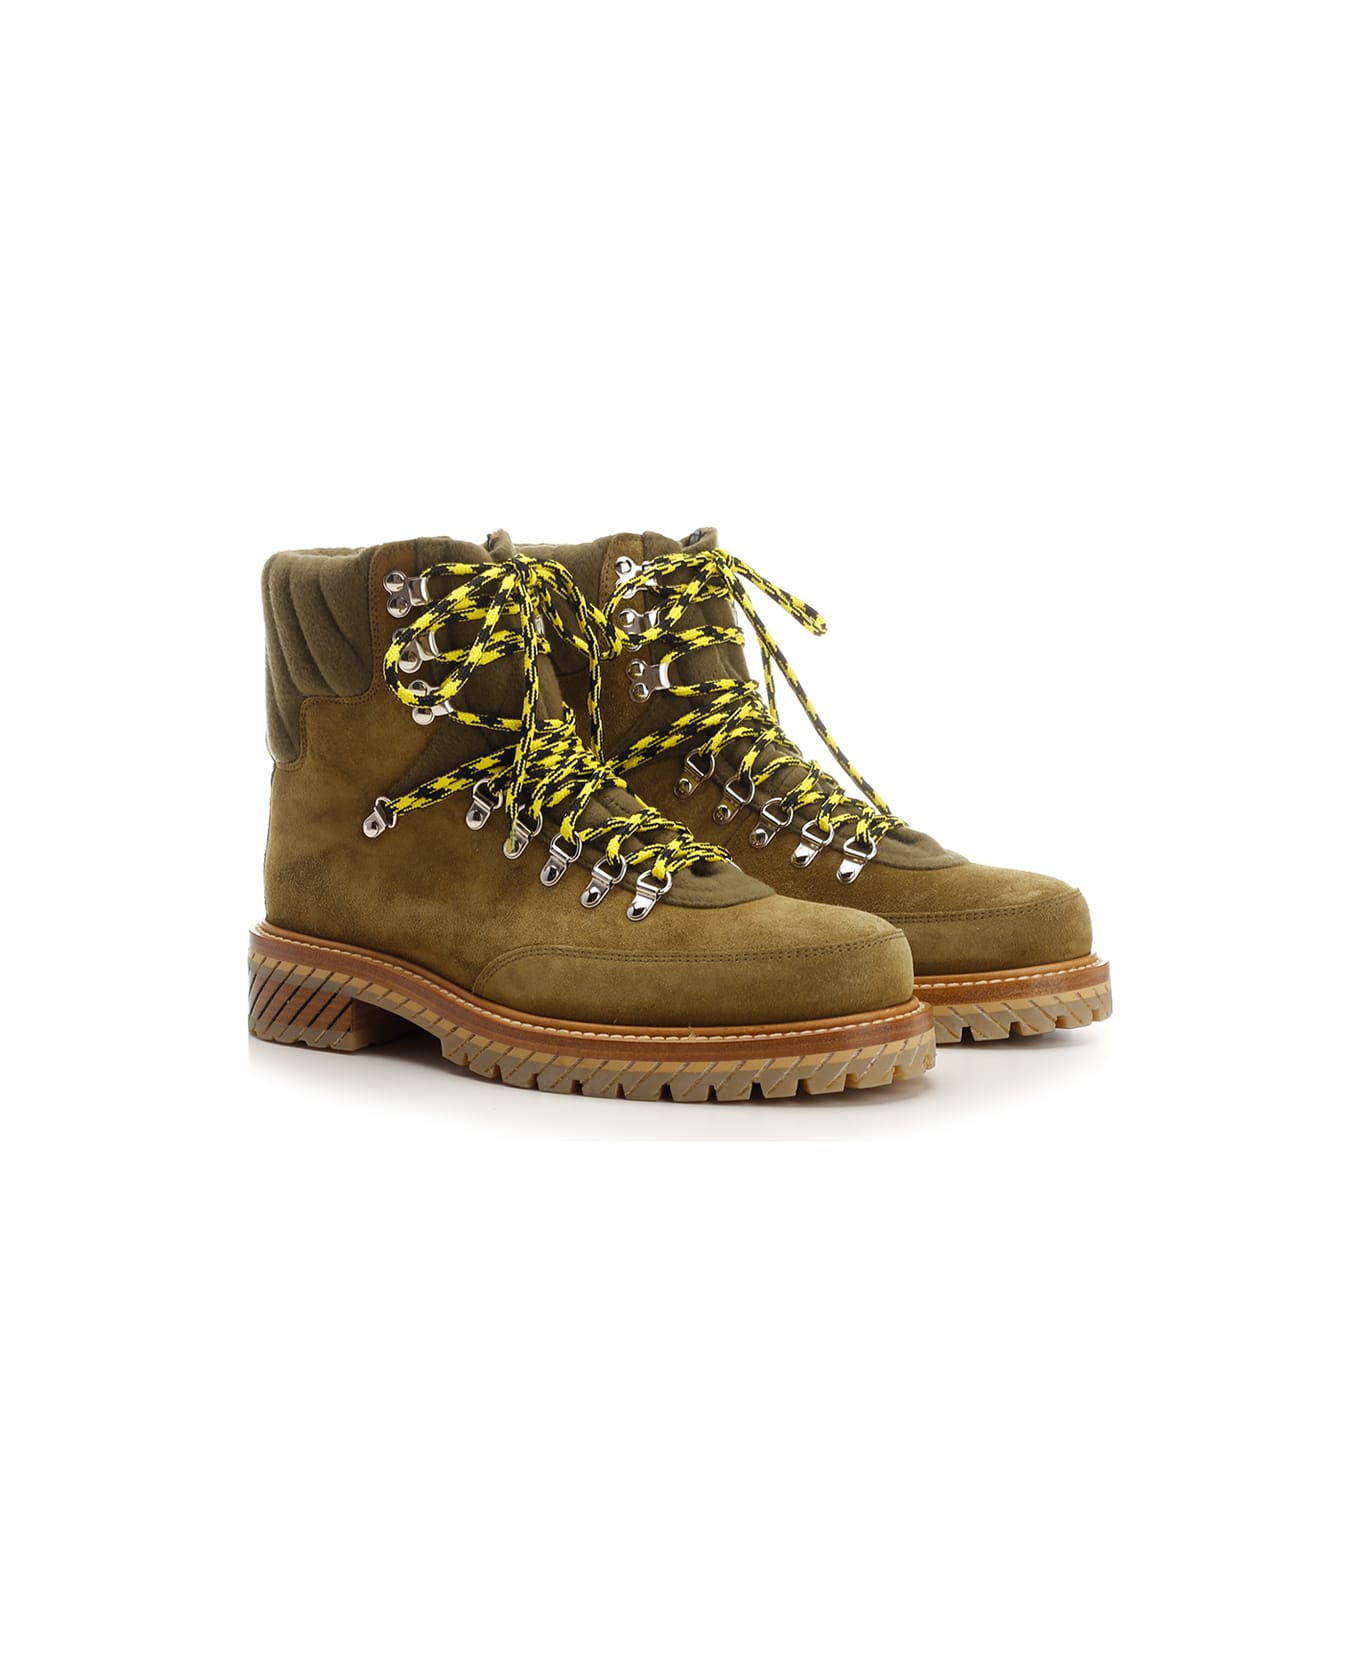 Off-White Suede Ankle Boot - Beige